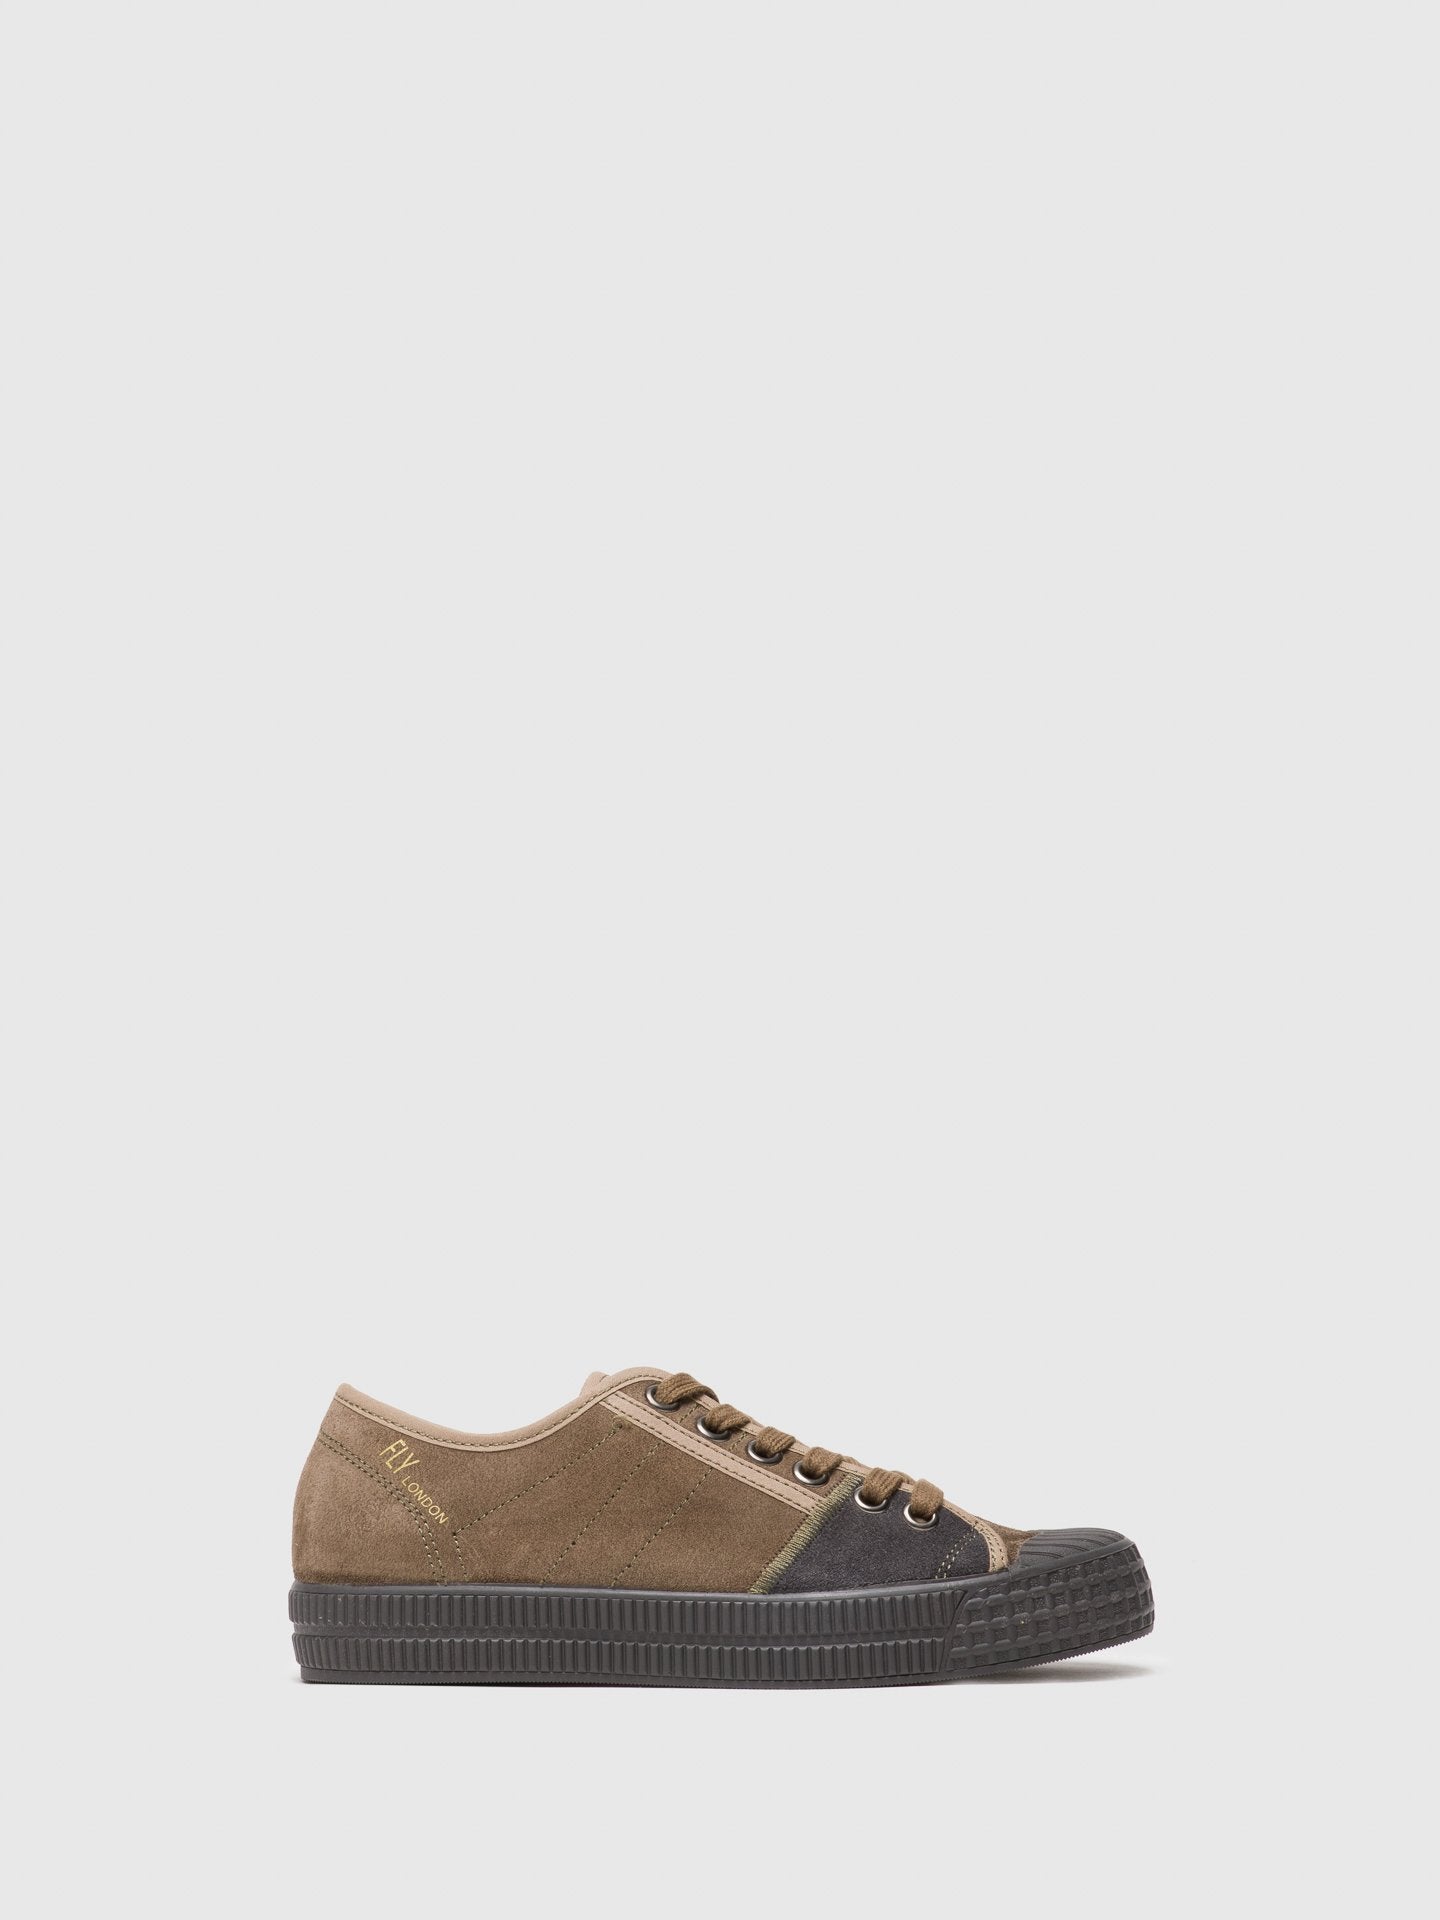 Fly London SandyBrown Low-Top Trainers